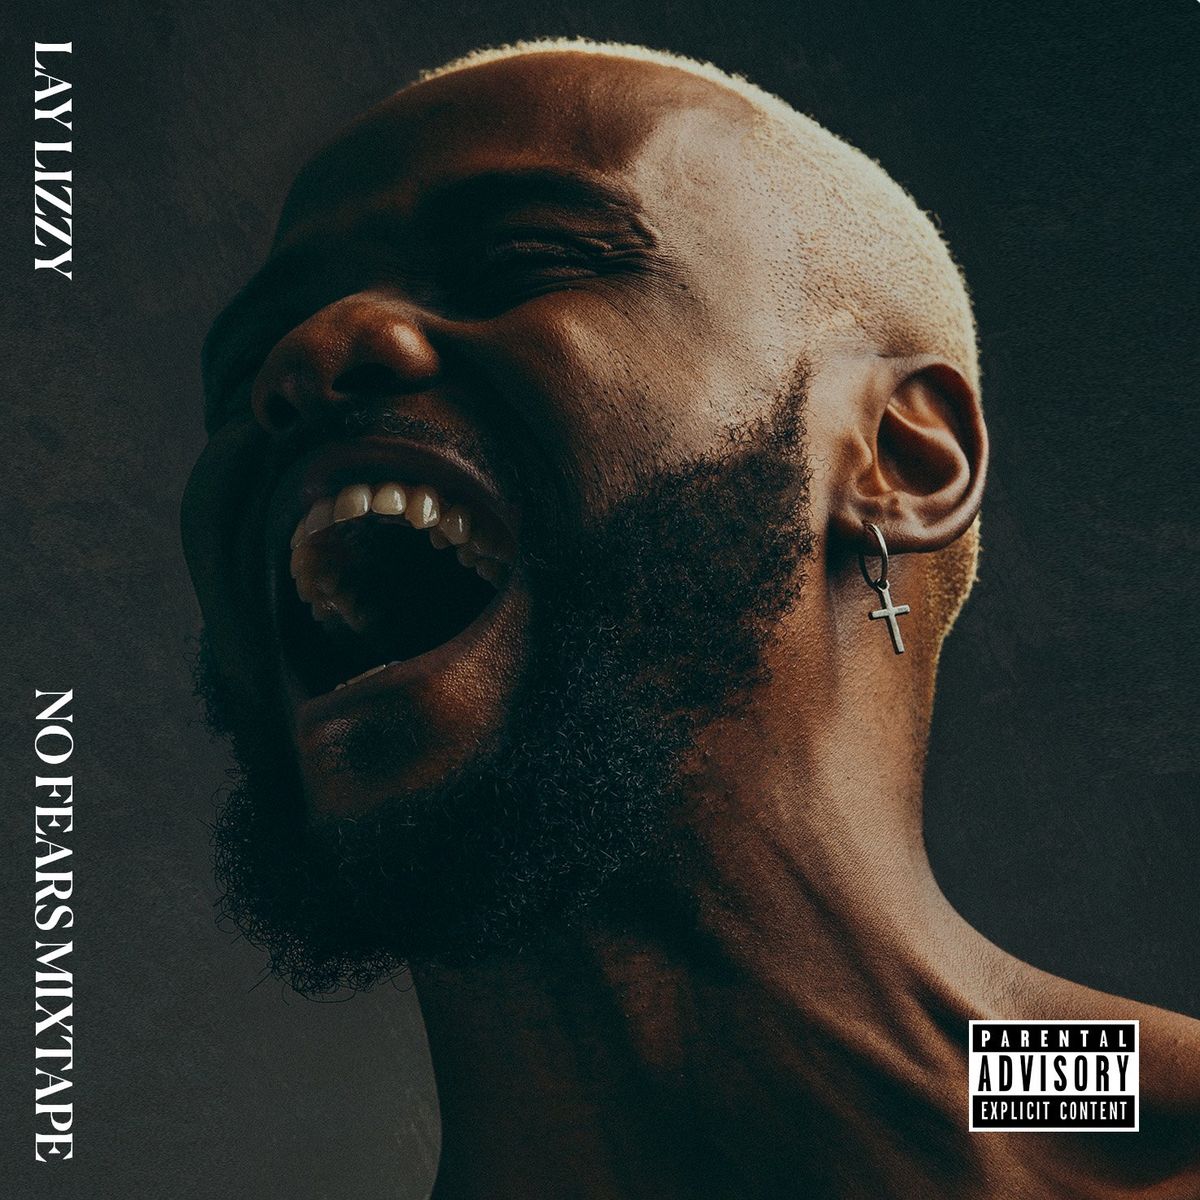 Laylizzy – A Dica 